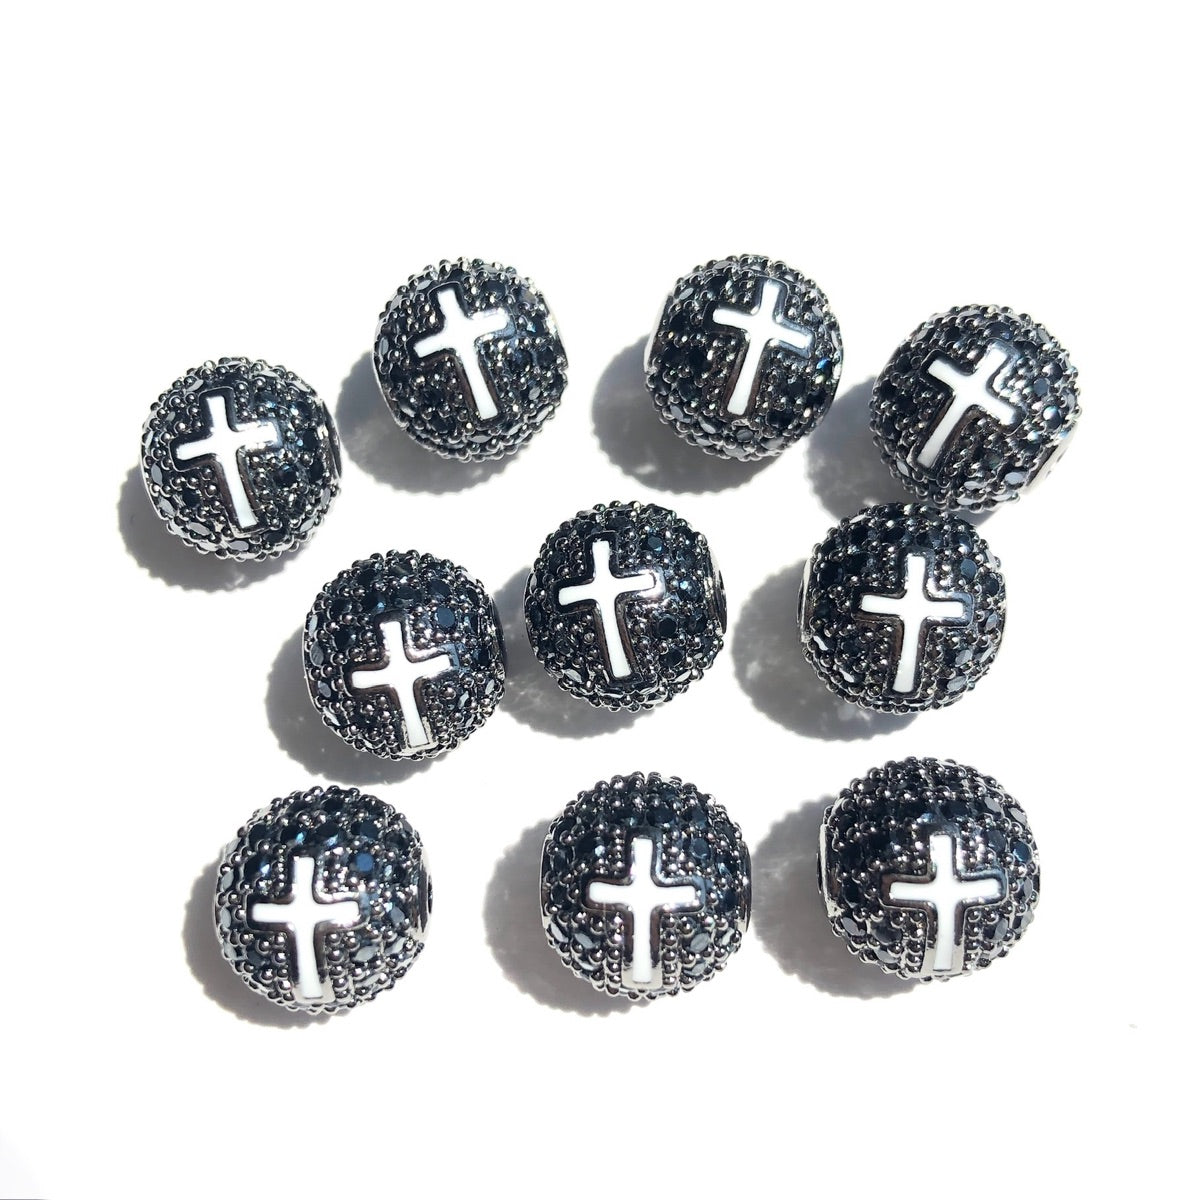 10-20pcs/lot 10mm CZ Paved Cross Ball Spacers Beads Black on Black CZ Paved Spacers 10mm Beads Ball Beads New Spacers Arrivals Charms Beads Beyond